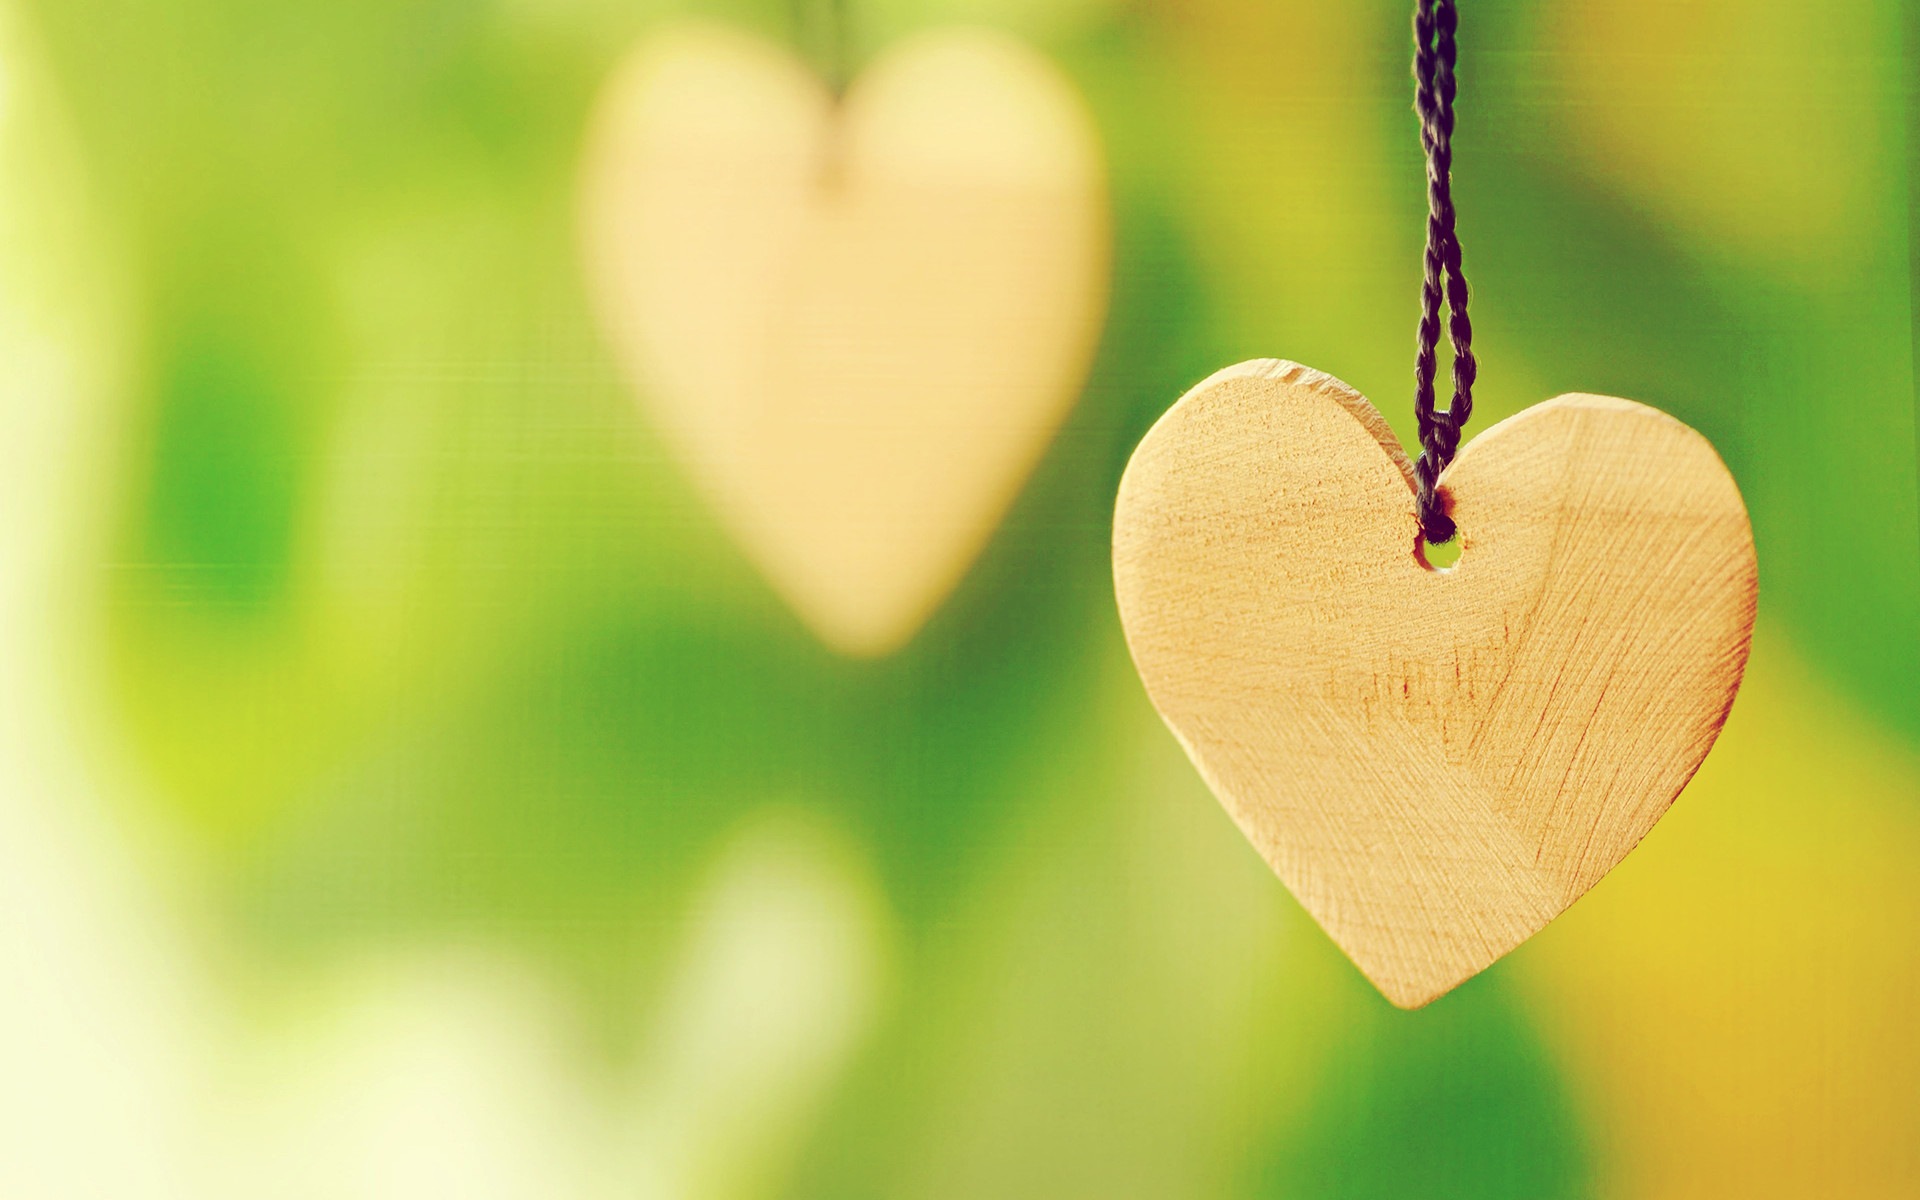 The theme of love, creative heart-shaped HD wallpapers #20 - 1920x1200